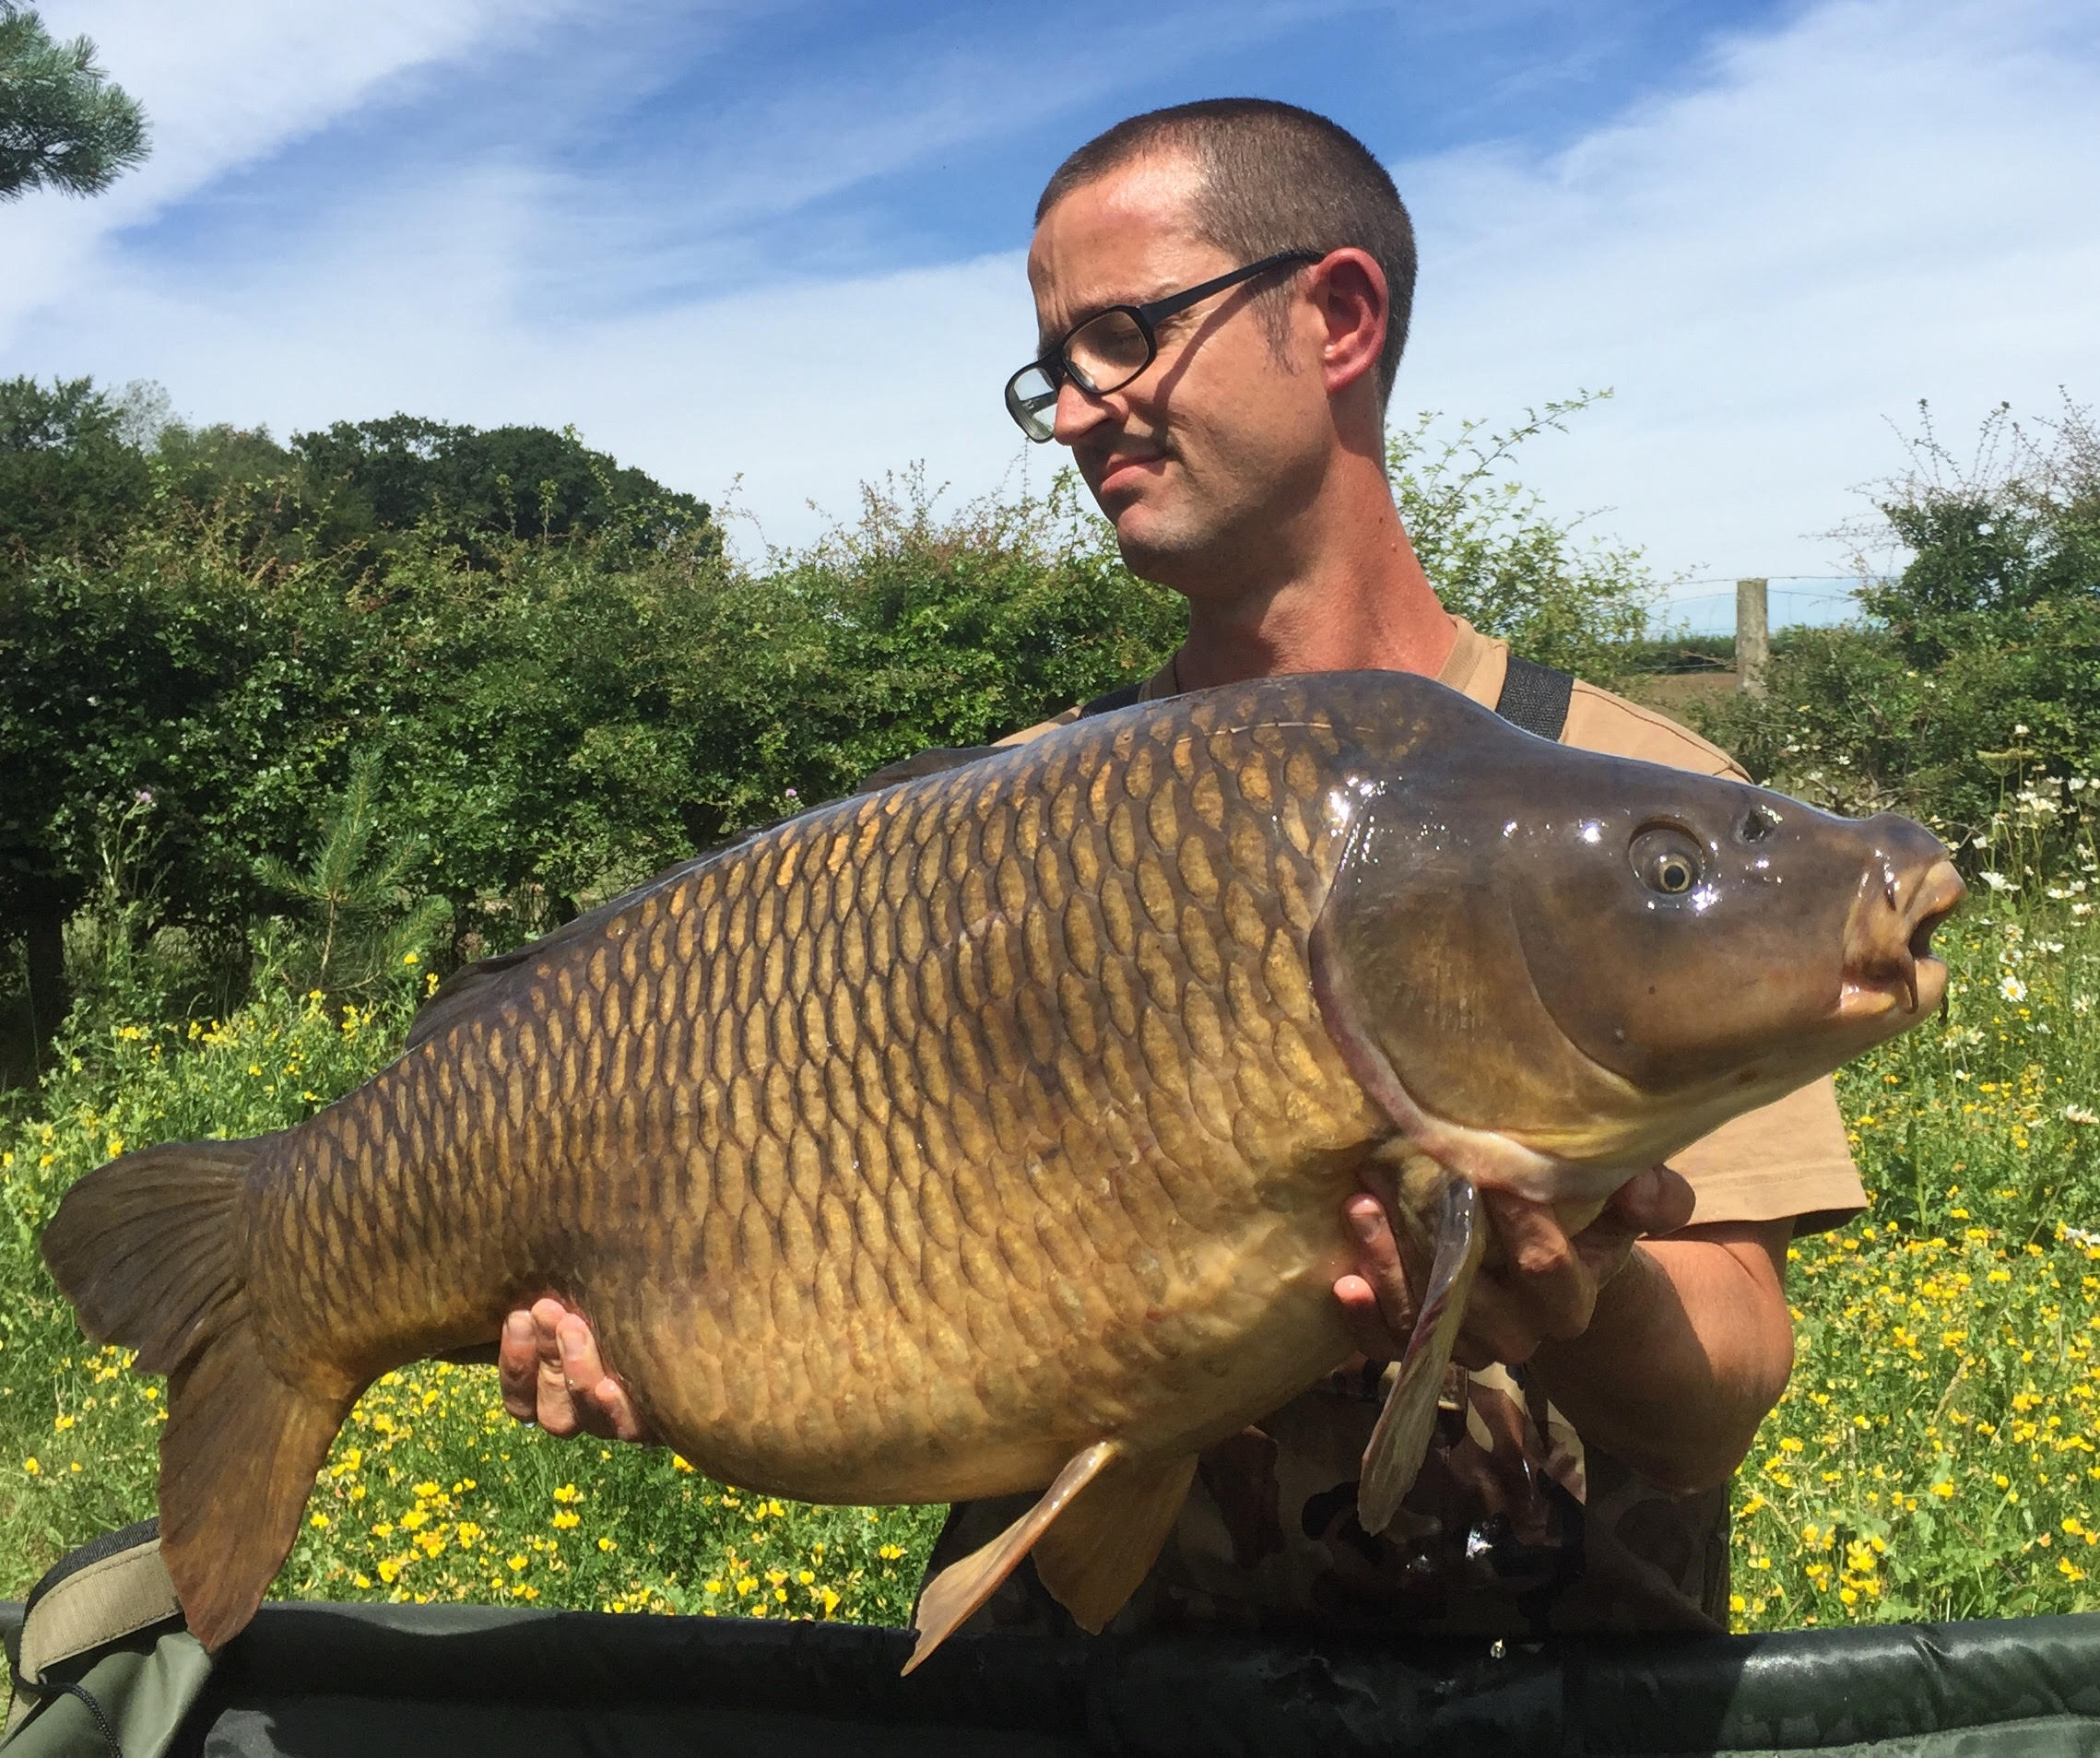 surface fishing for carp and stalking in summer months